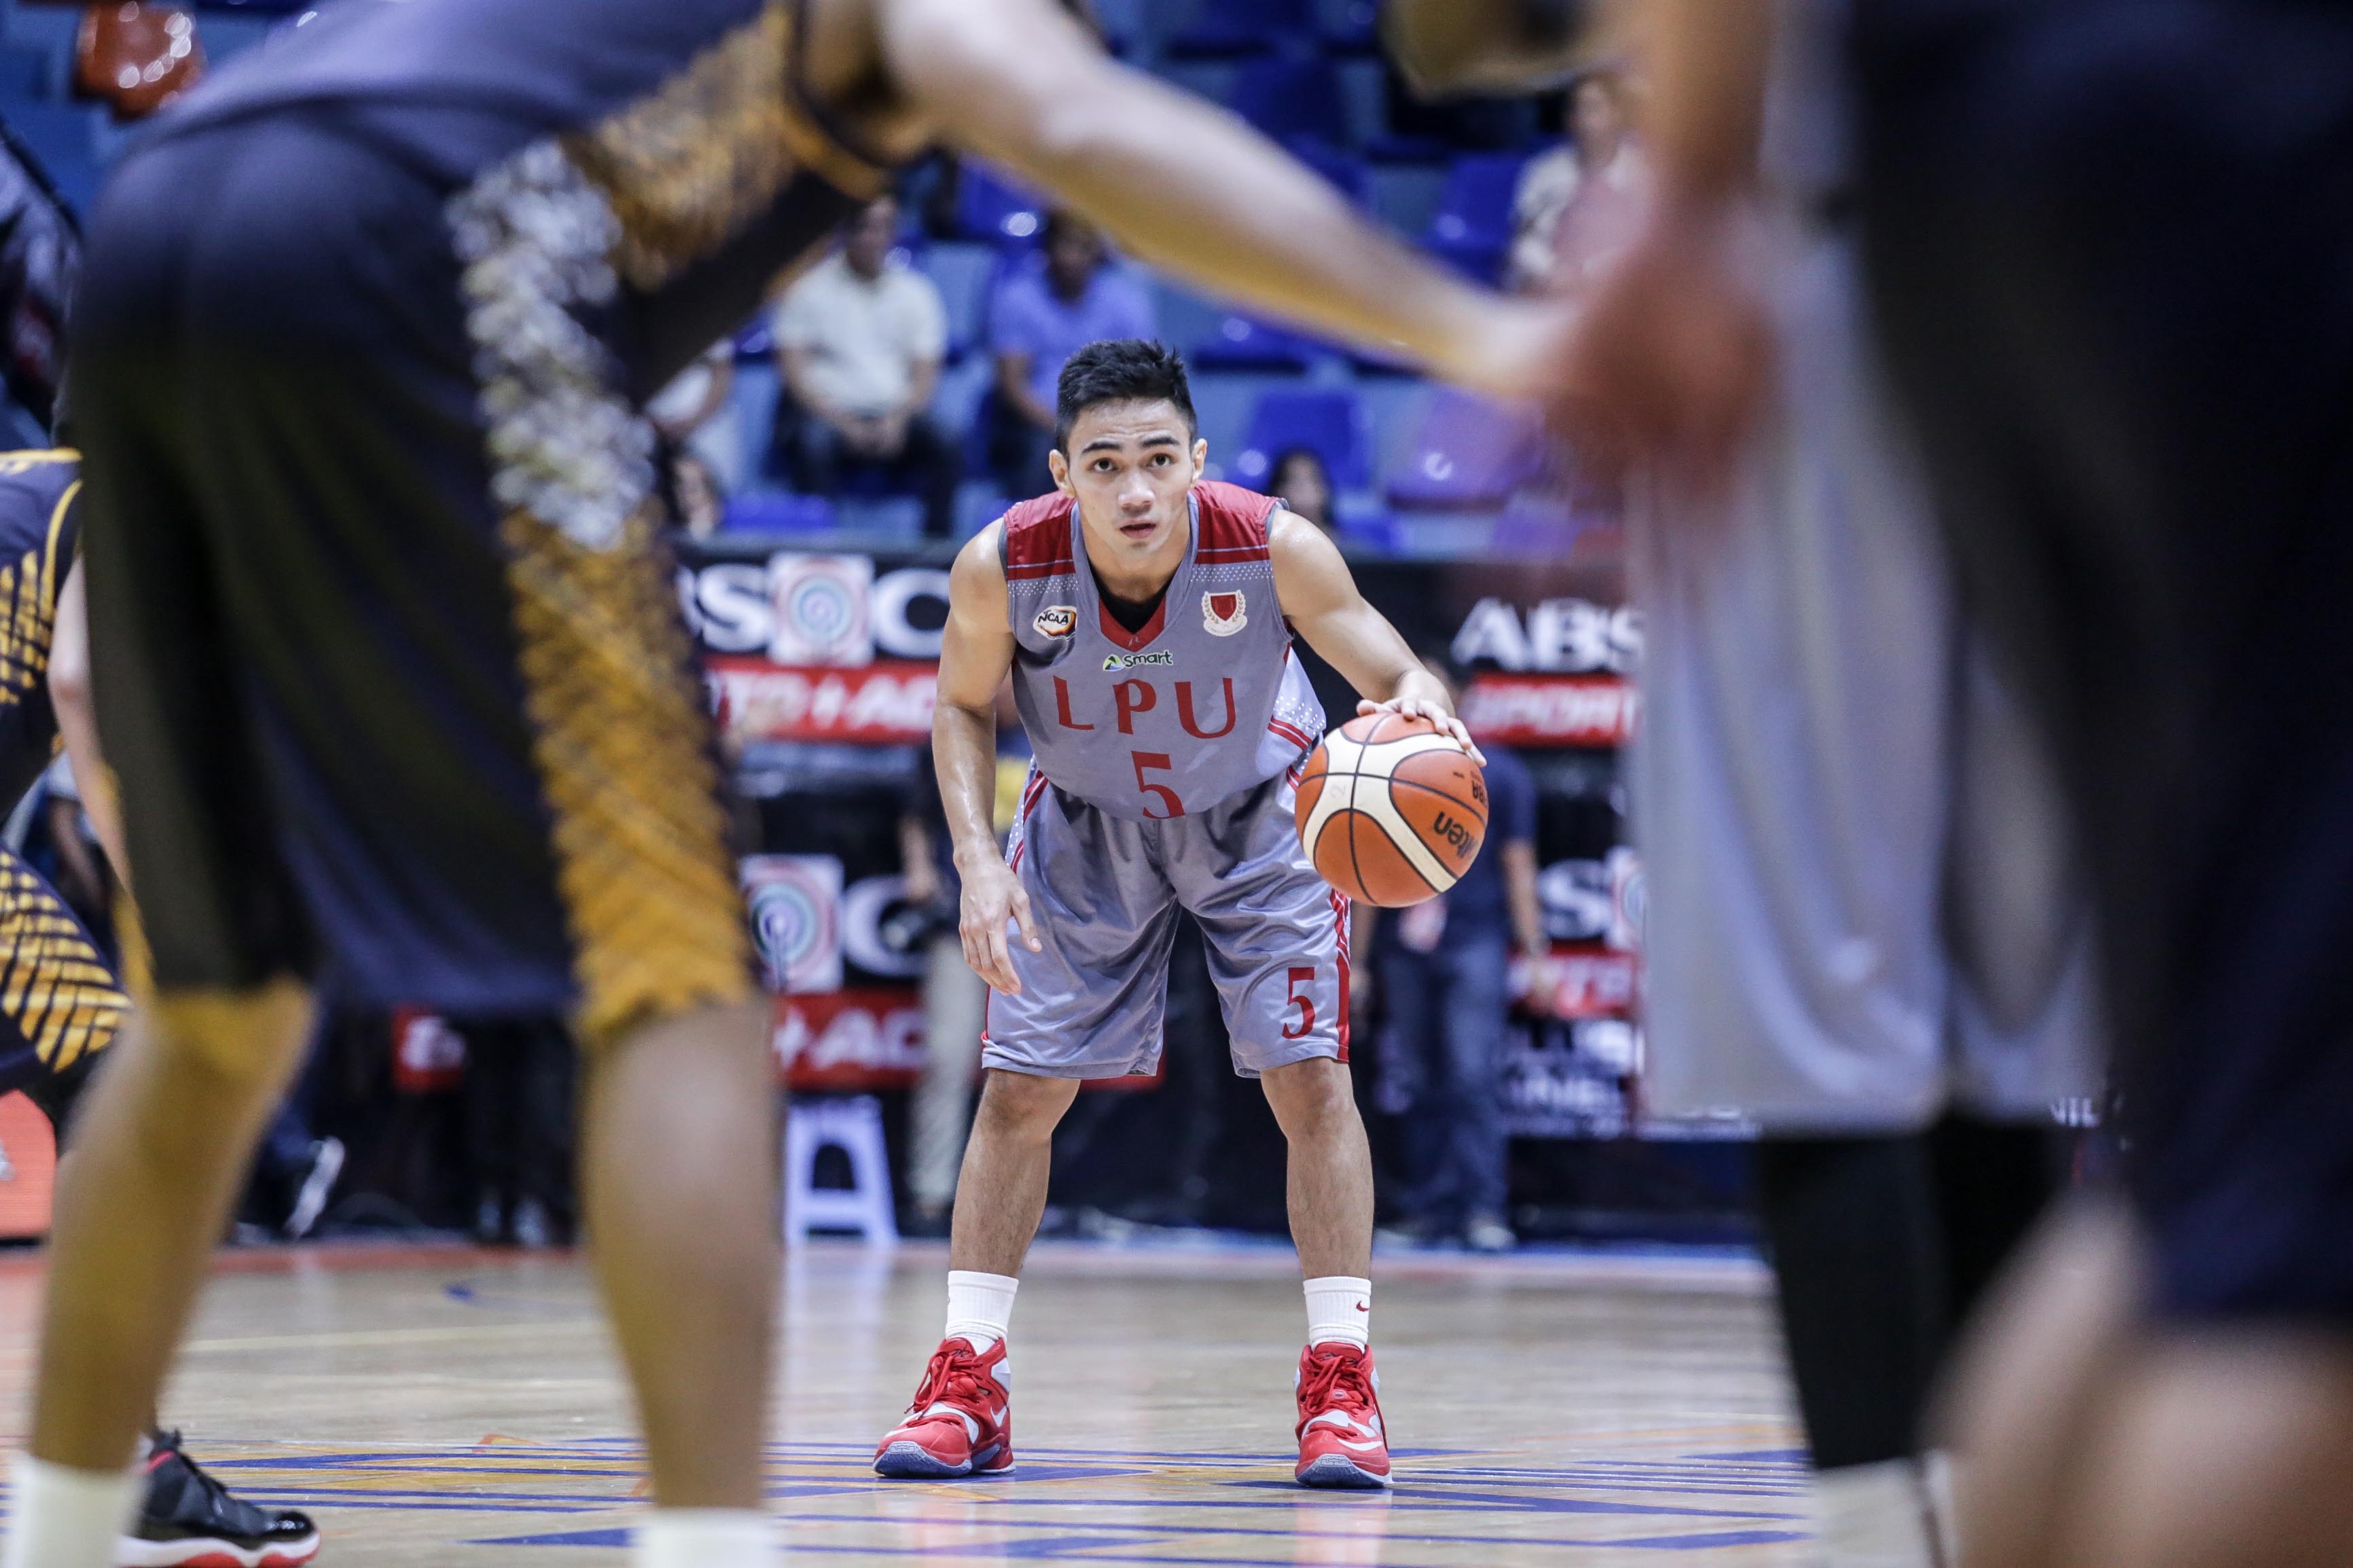 Lyceum Pirates. Photo by Tristan Tamayo/INQUIRER.net